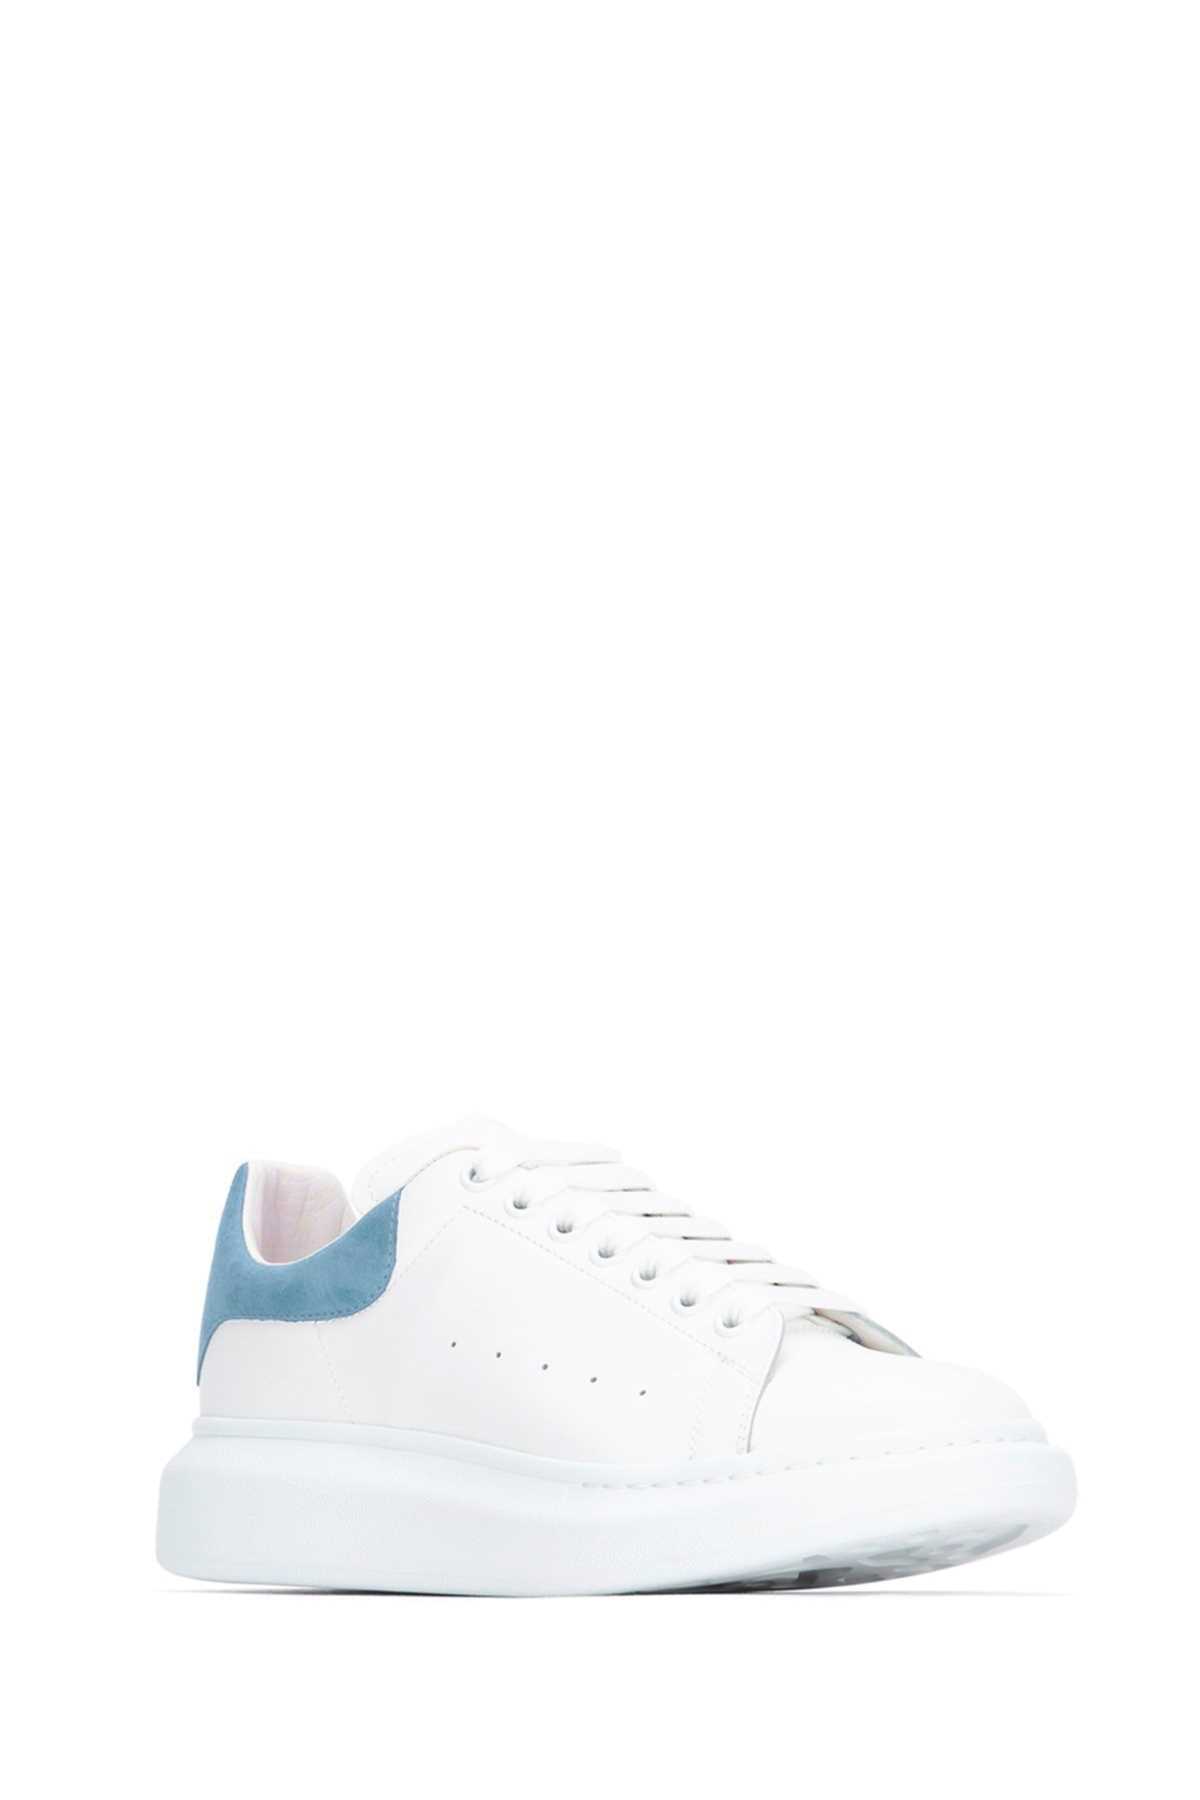 Alexander Mcqueen White Leather Sneakers With Pastel Light Blue Sued In White Powderblue